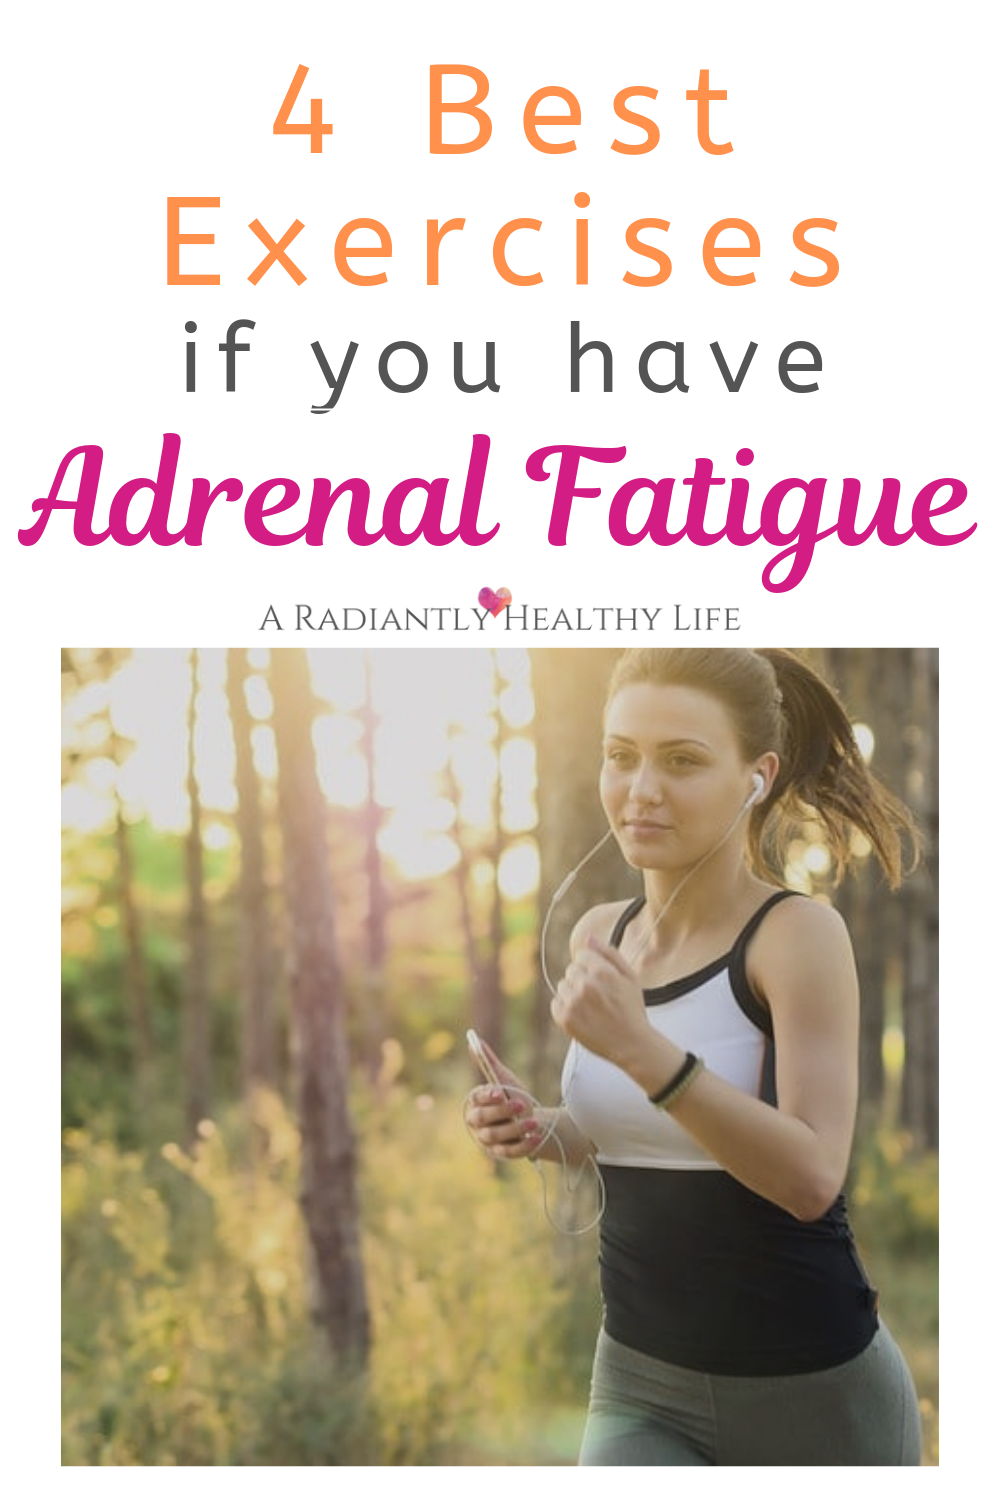 Best Movement And Exercise For Adrenal Fatigue